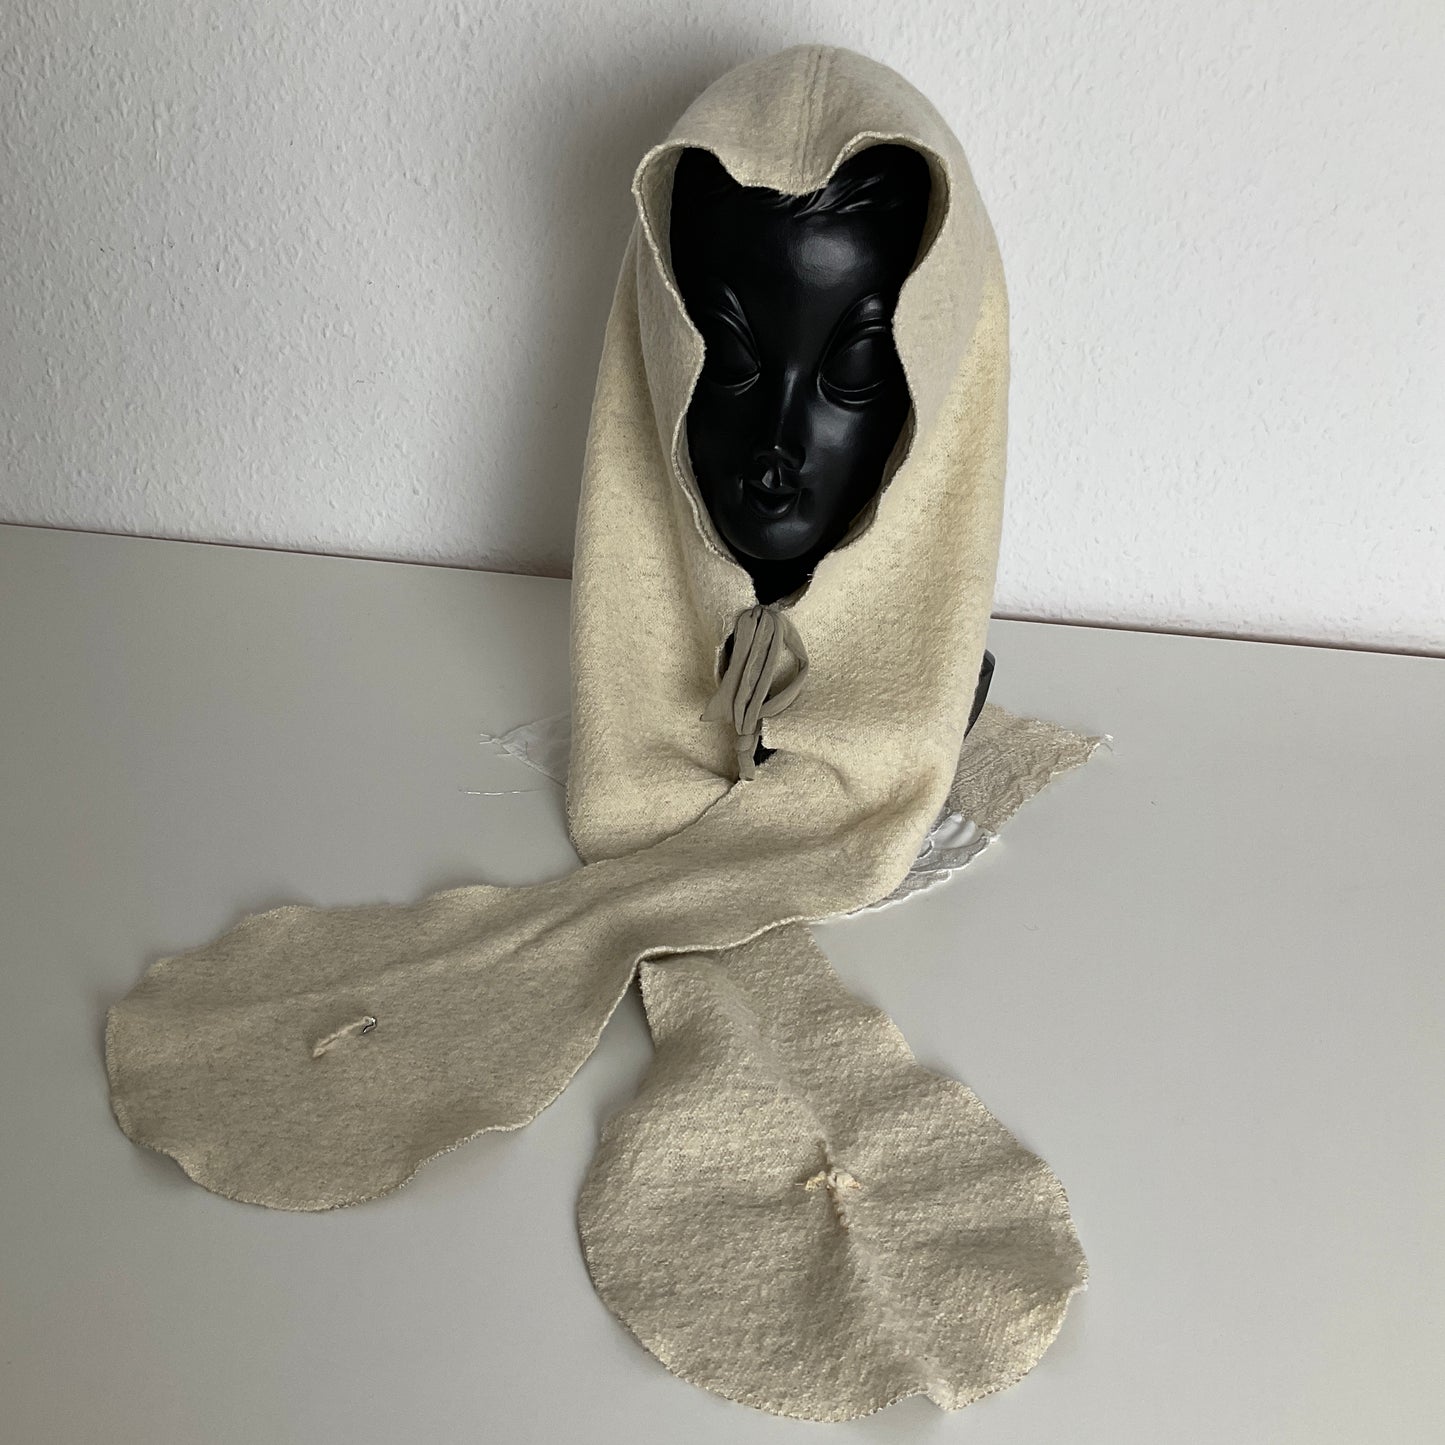 ꒰⑅ᵕ༚ᵕ꒱˖♡ hooded ivory stole in virgin wool, viscose and silk ♡˖꒰ᵕ༚ᵕ⑅꒱